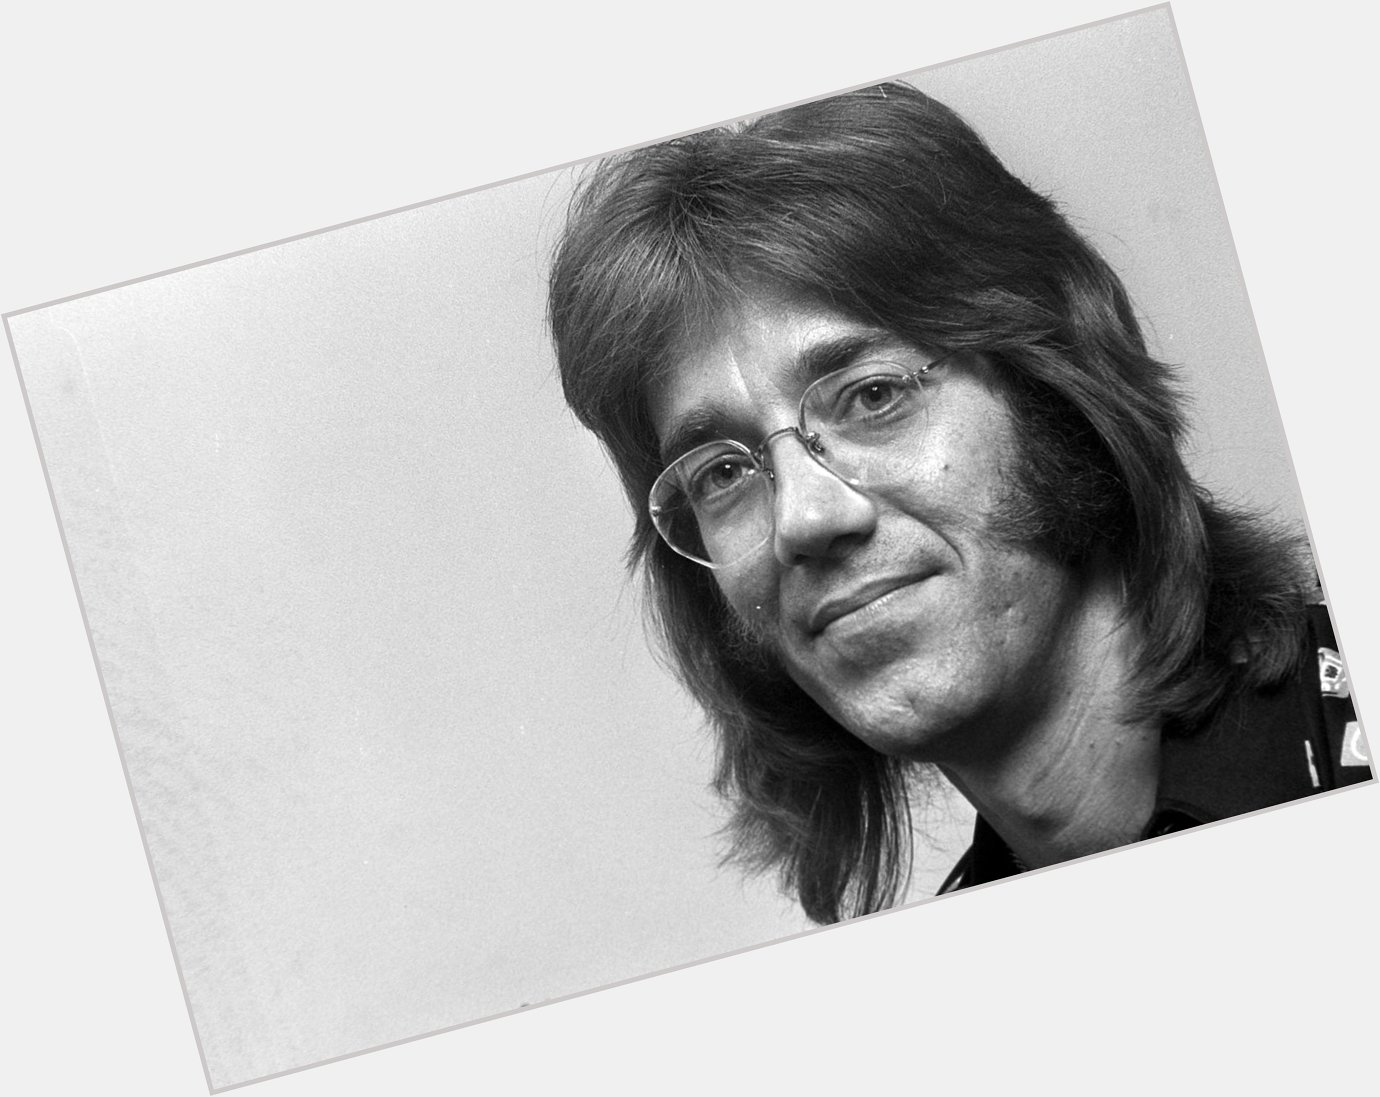 Happy birthday to keyboardist Ray Manzarek! He would have been 78 today. 